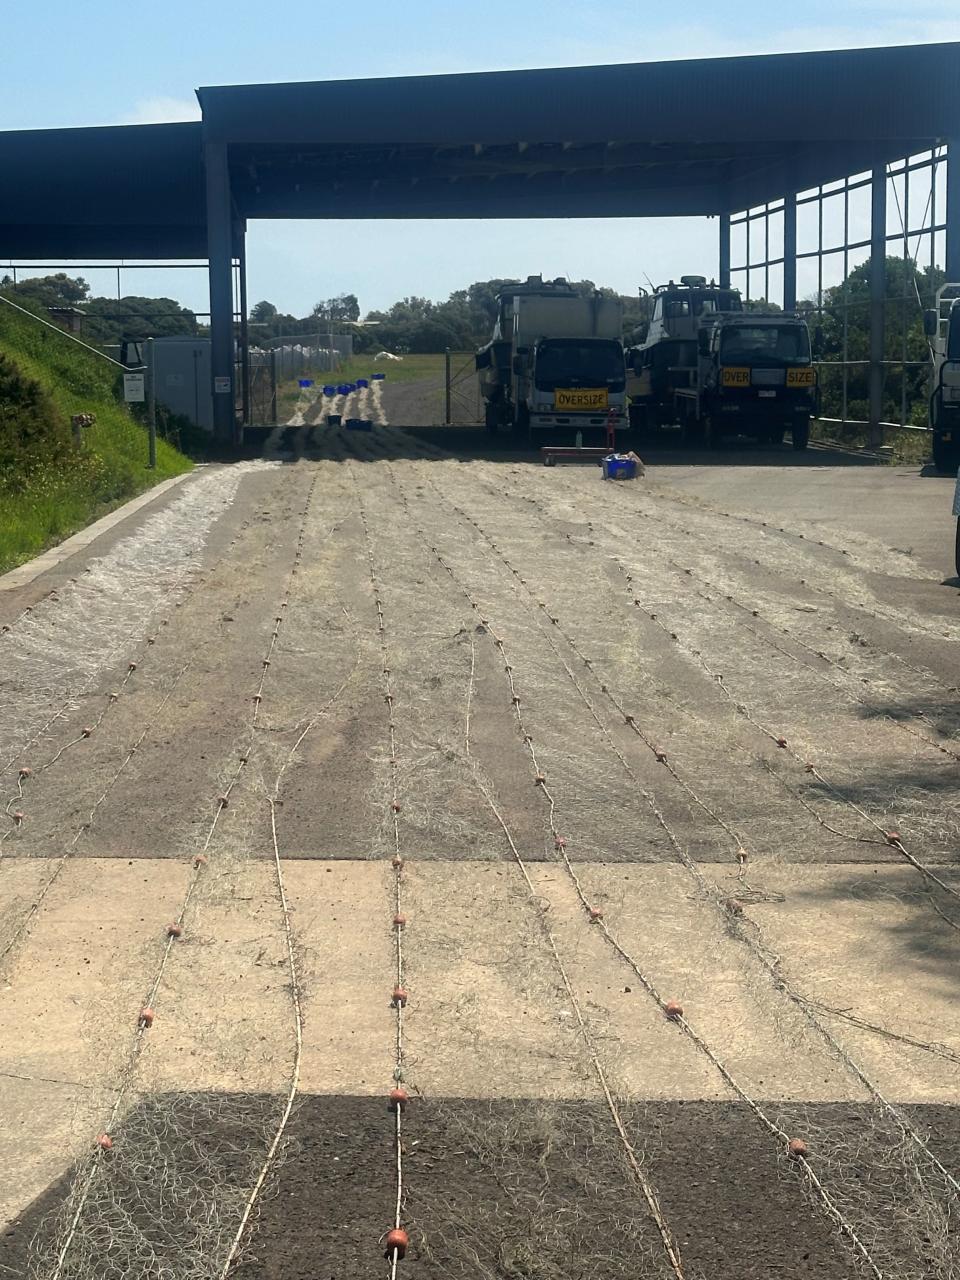 A shed at VFA's Queenscliff depot with two truck in it in the distance. Around 844 metres of seized nets have been laid out on the ground.